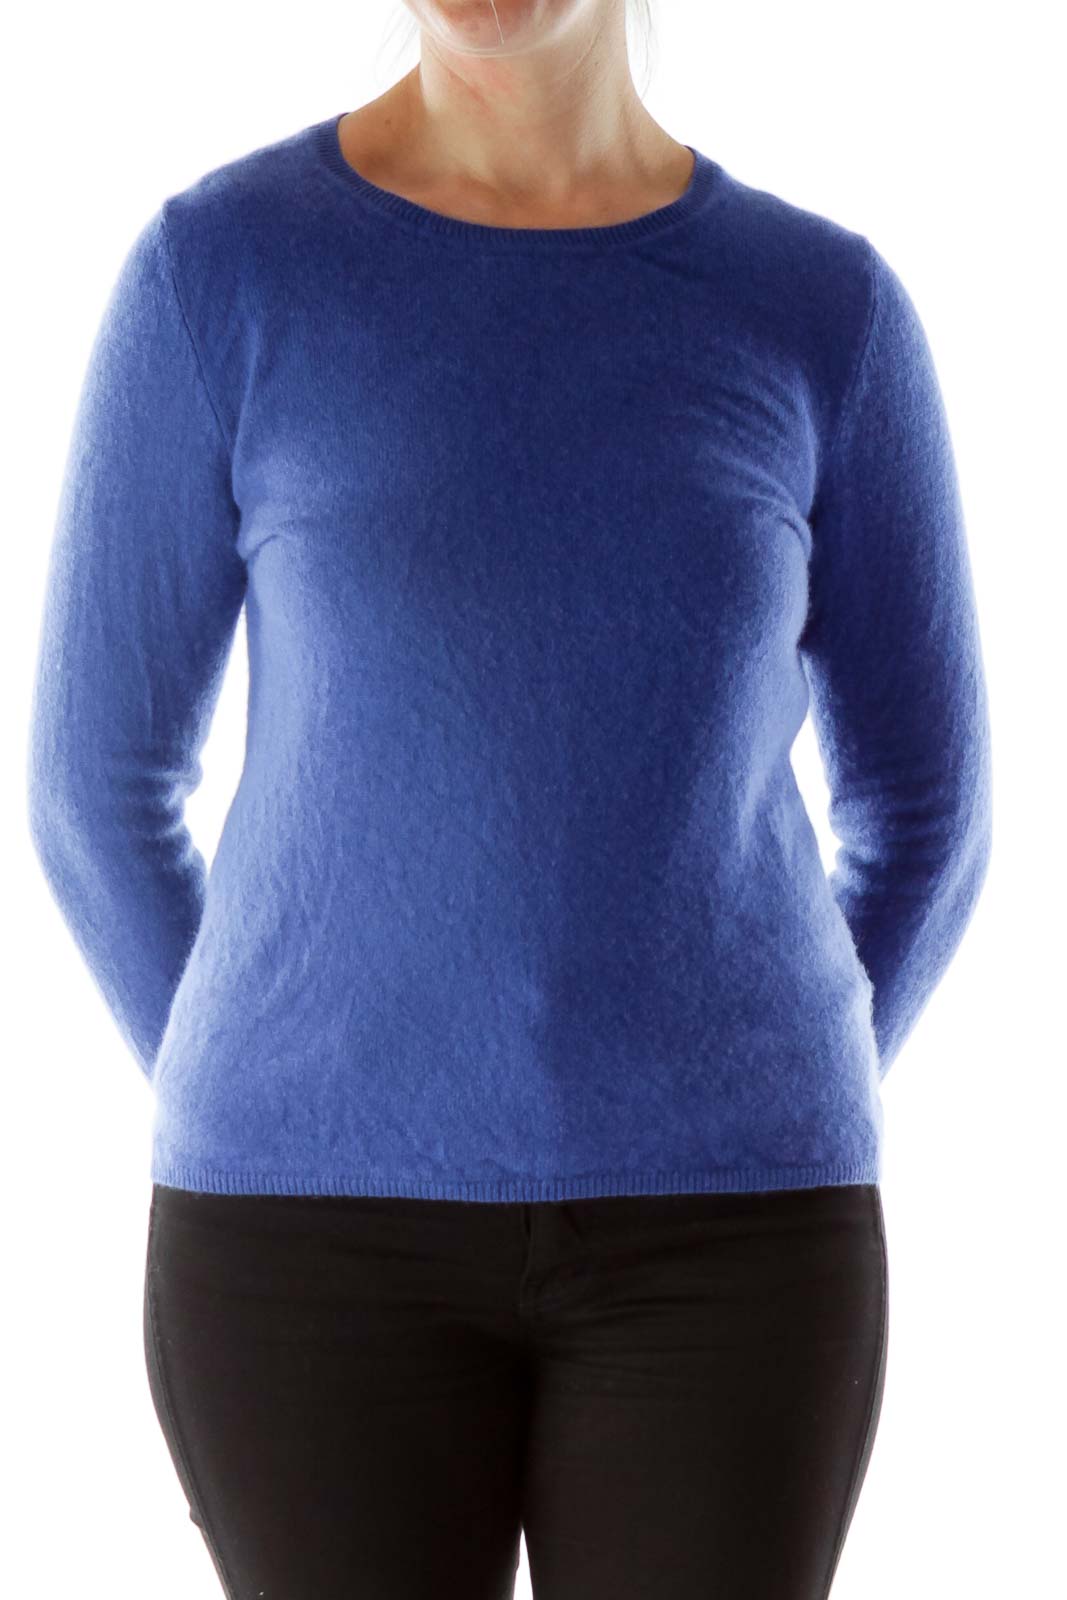 Blue Knit Sweater Front